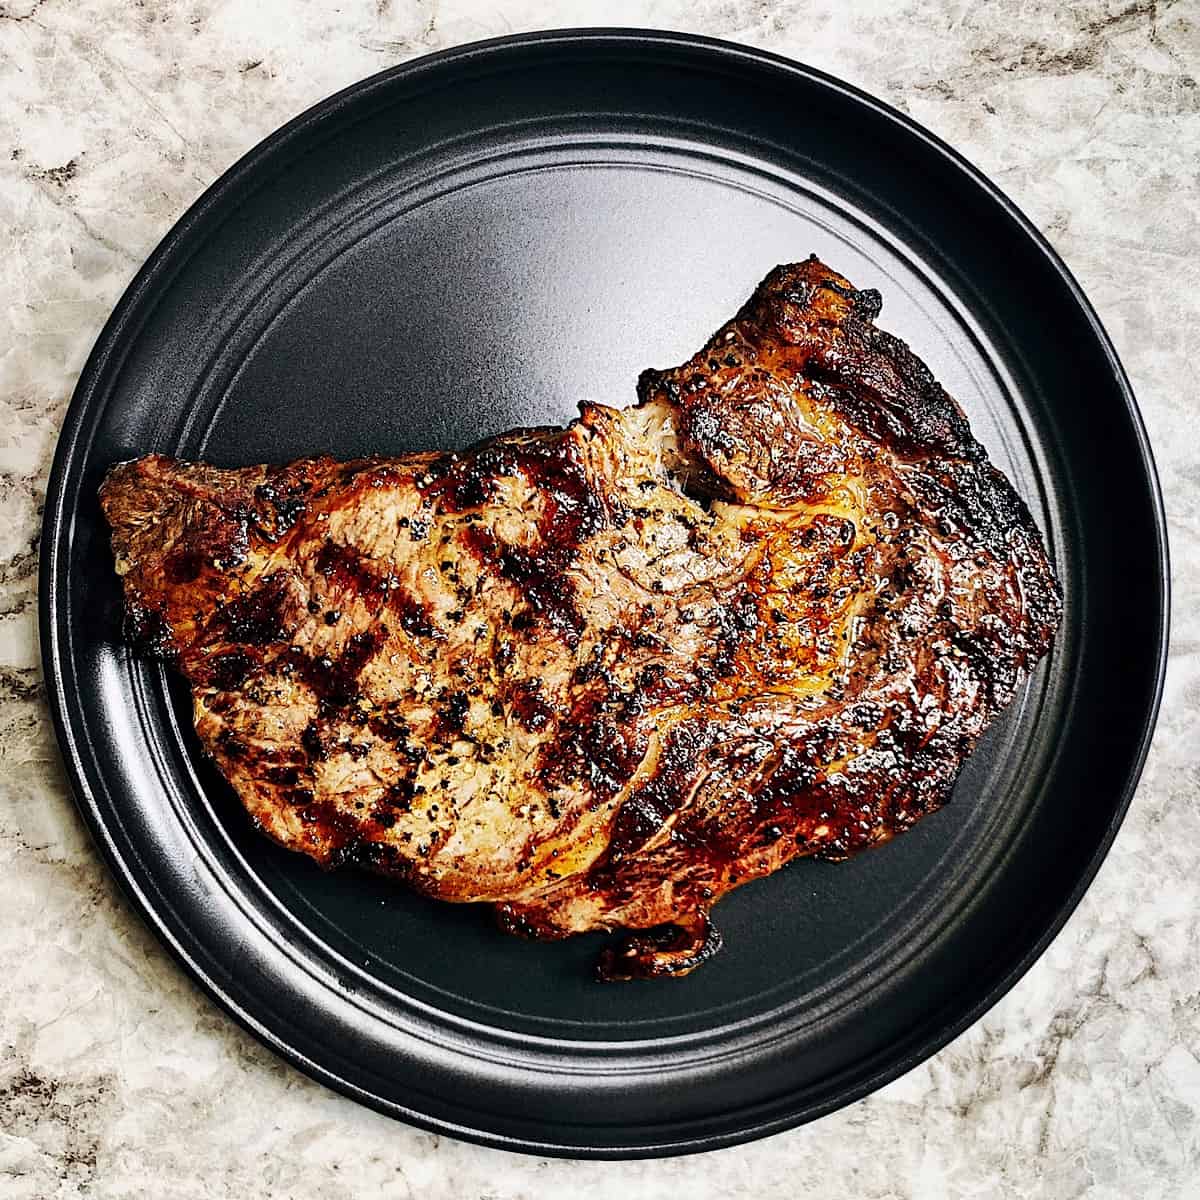 Black plate with large grilled ribeye steak